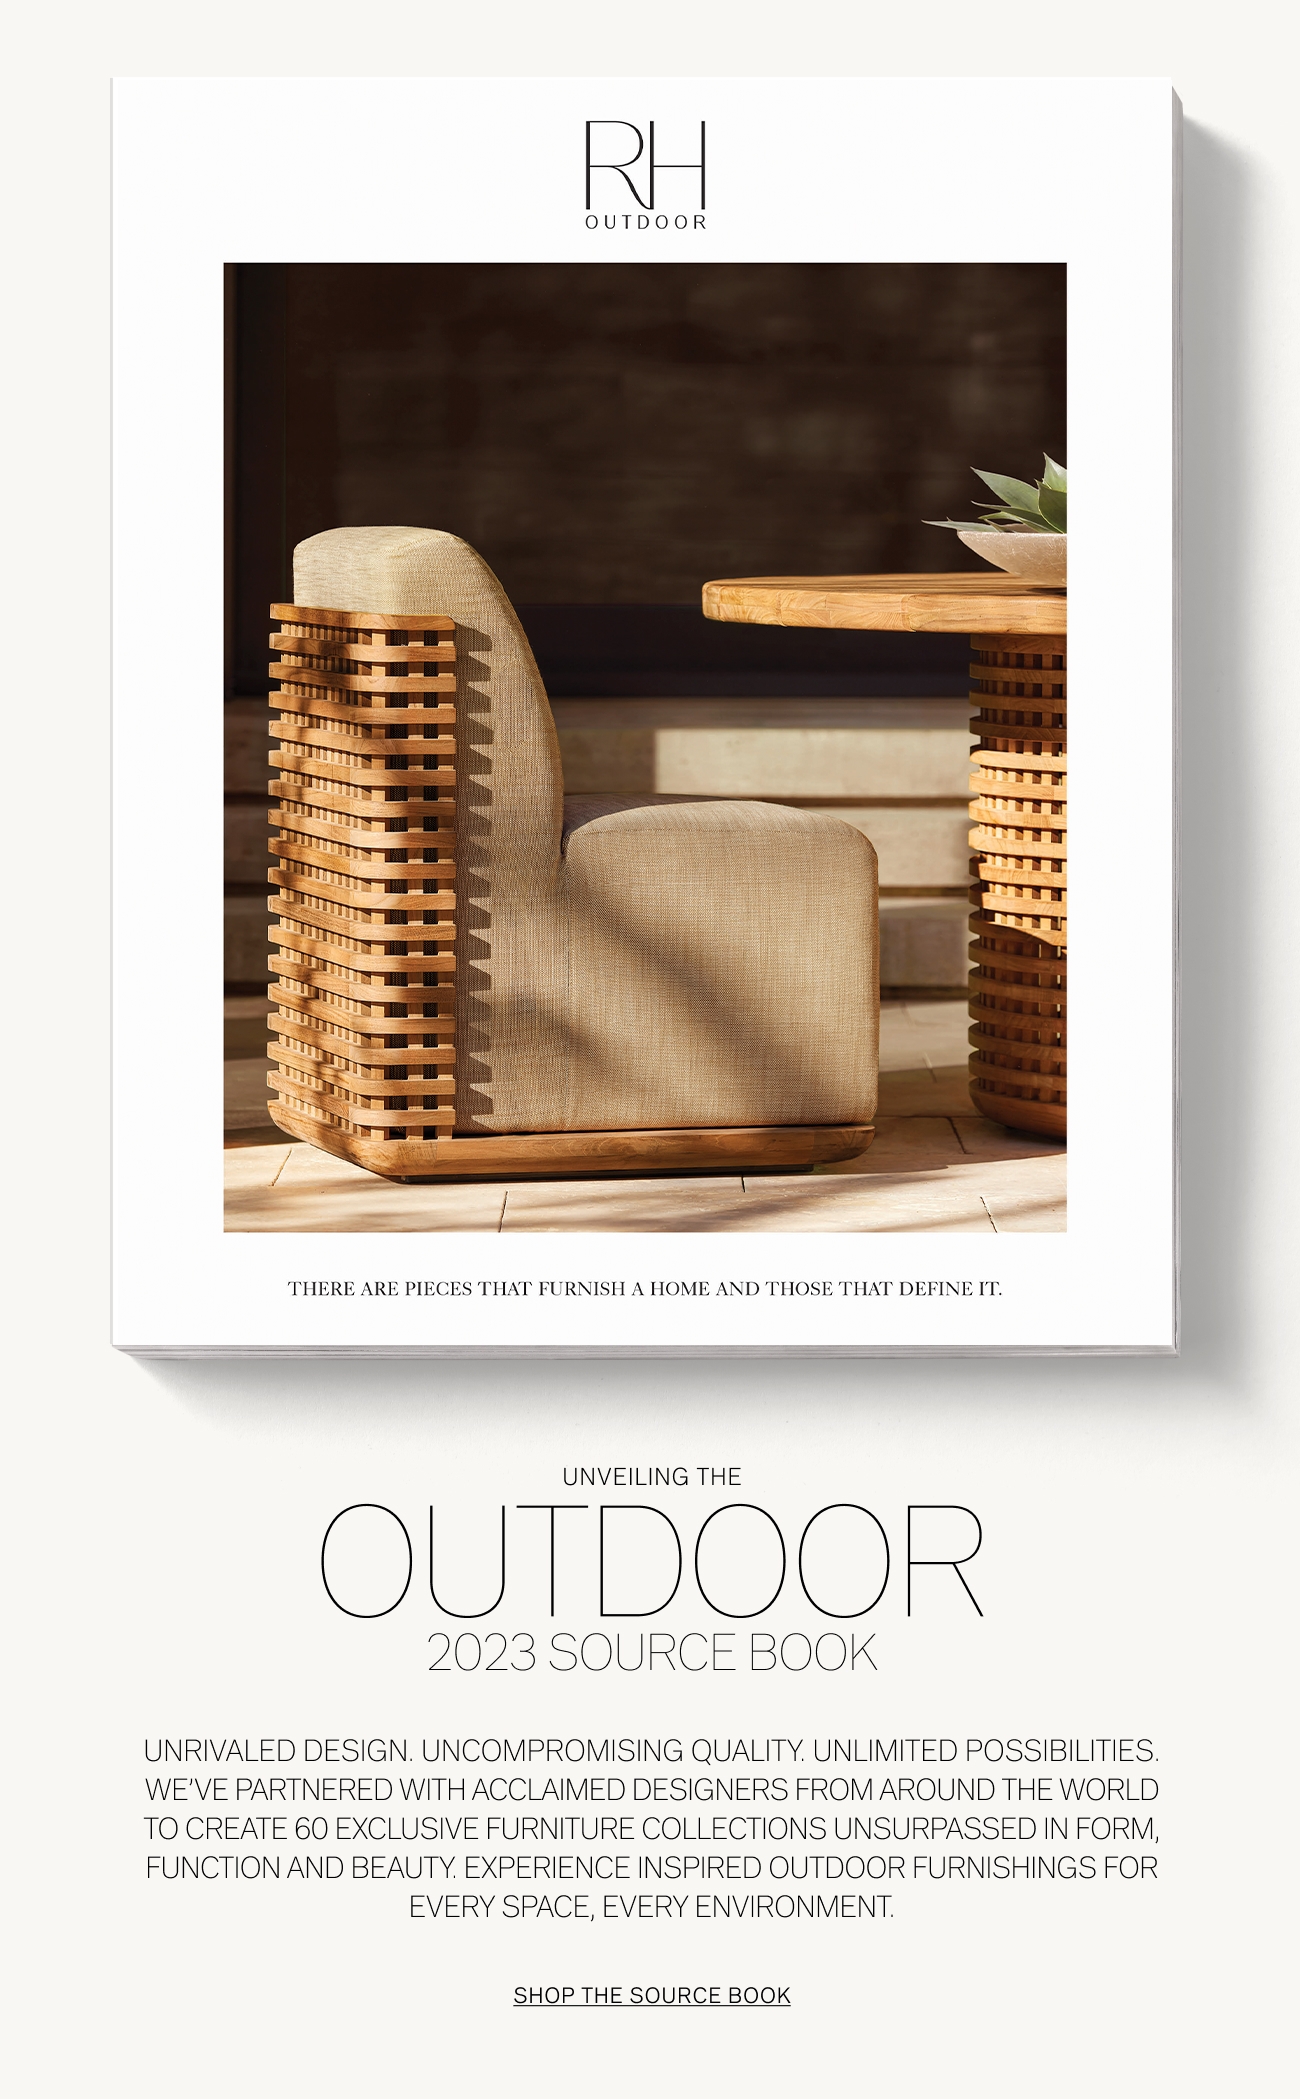 H OUTDOOR UNVEILING THE OUTDOO 2023 SOURCE BOOK UNRIVALED DESIGN. UNCOMPROMISING QUALITY. UNLIMITED POSSIBILITIES. WE'VE PARTNERED WITH THE WORLDS MOST ACCLAIMED DESIGNERS TO CREATE 60 EXCLUSIVE FURNITURE COLLECTIONS UNSURPASSED IN FORM, FUNCTION AND BEAUTY. EXPERIENCE 260 PAGES OF INSPIRED OUTDOOR FURNISHINGS FOR EVERY SPACE, EVERY ENVIRONMENT. SHOP THE SOURCE BOOK 